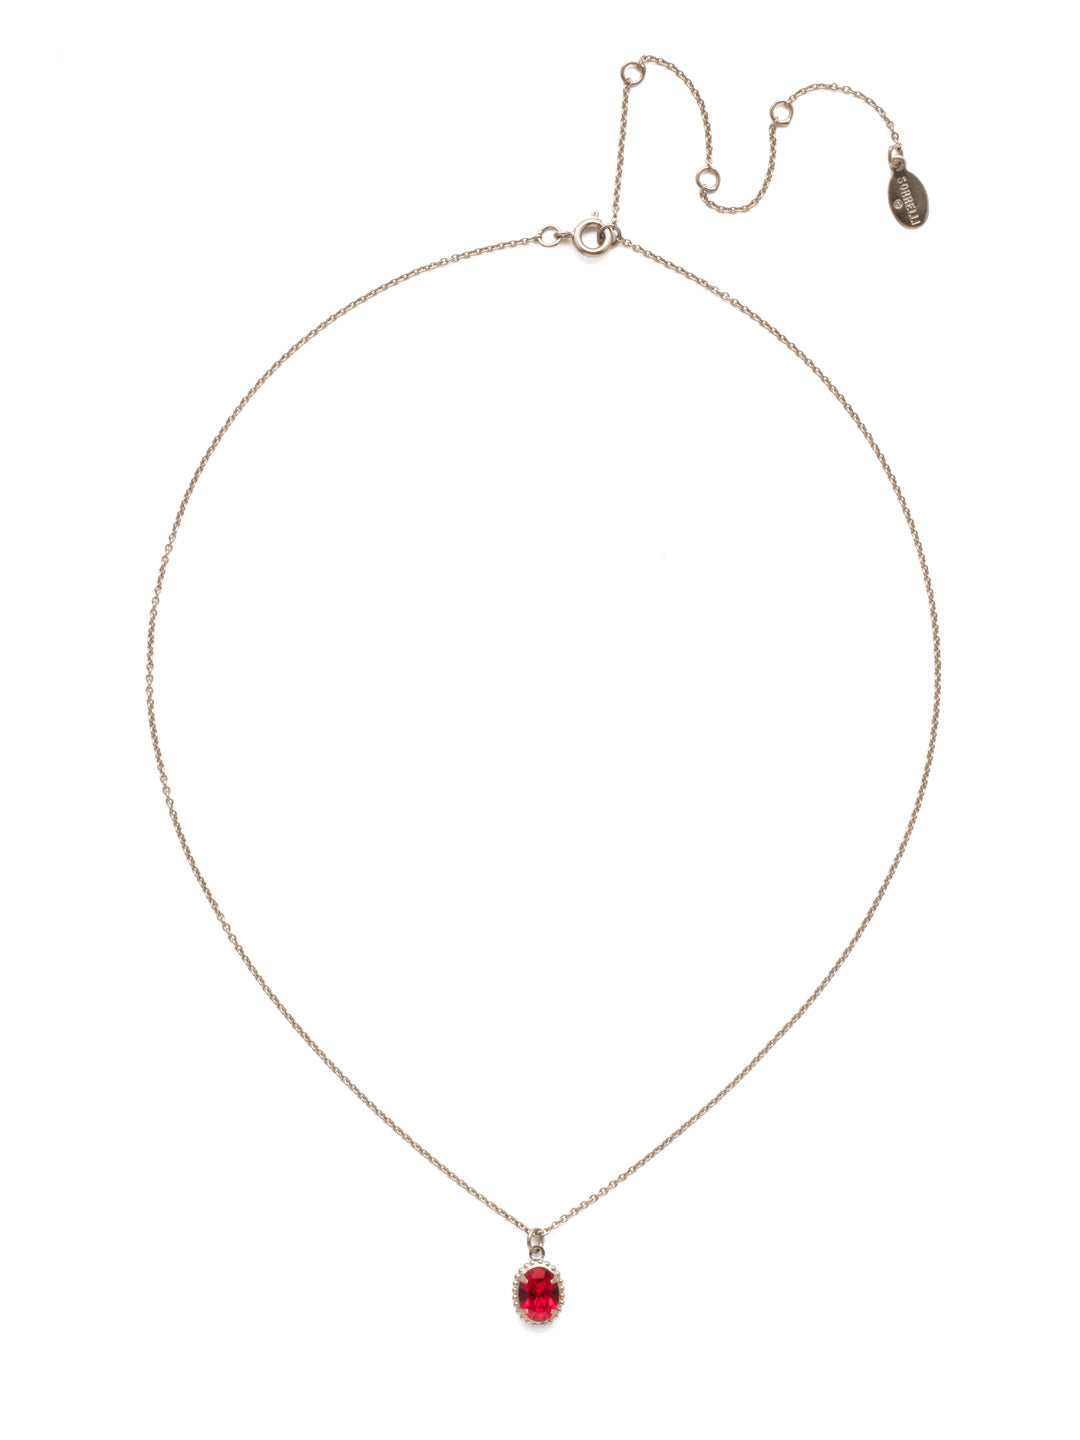 Maisie Pendant Necklace - NEF49ASSI - <p>This is the perfect day-to-night sparkling tiny pendant necklace that has an adjustable chain to fit your neckline. From Sorrelli's Siam collection in our Antique Silver-tone finish.</p>